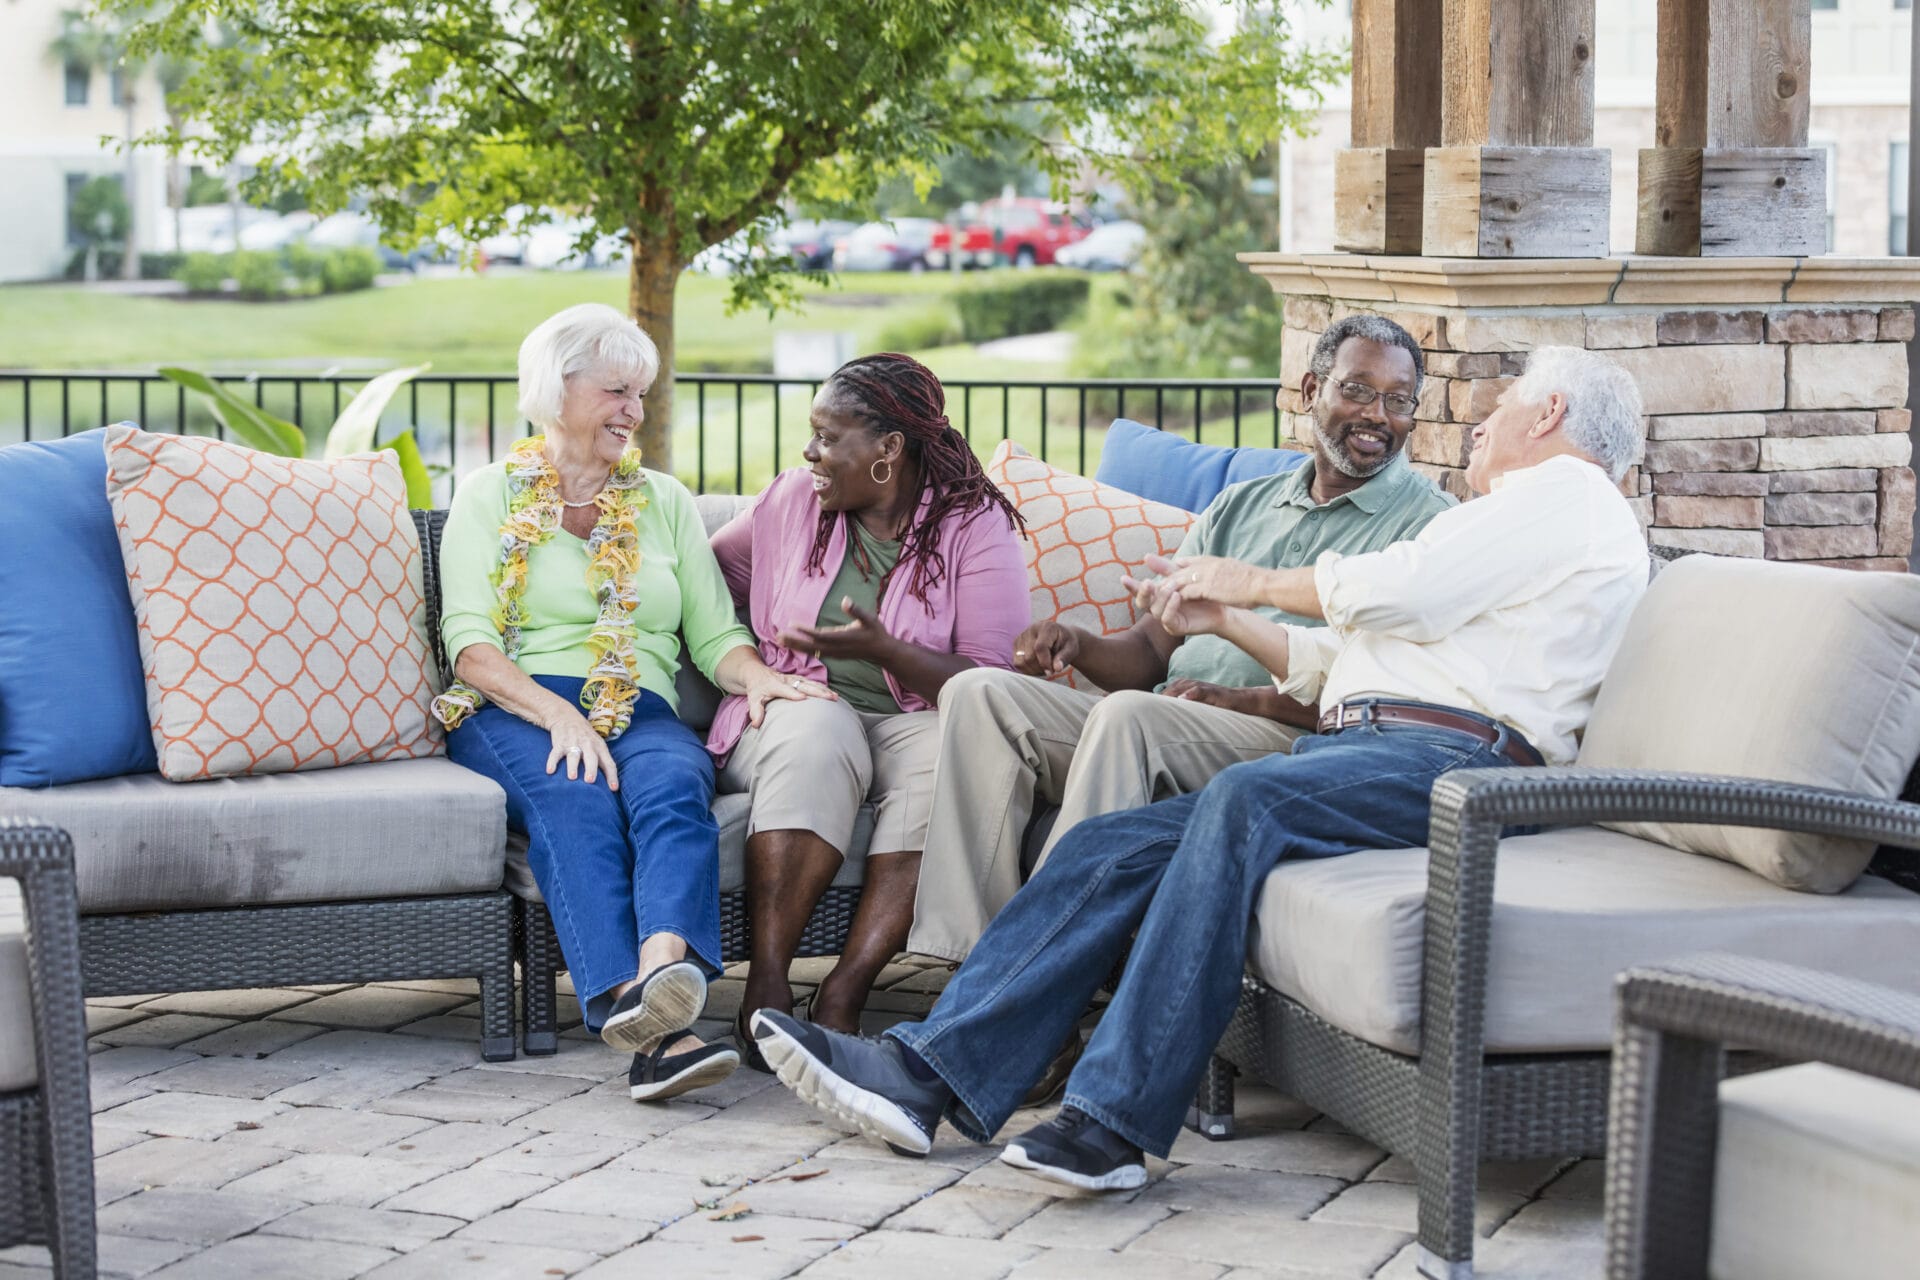 Four older adults sit outdoors on a patio having lively conversation.